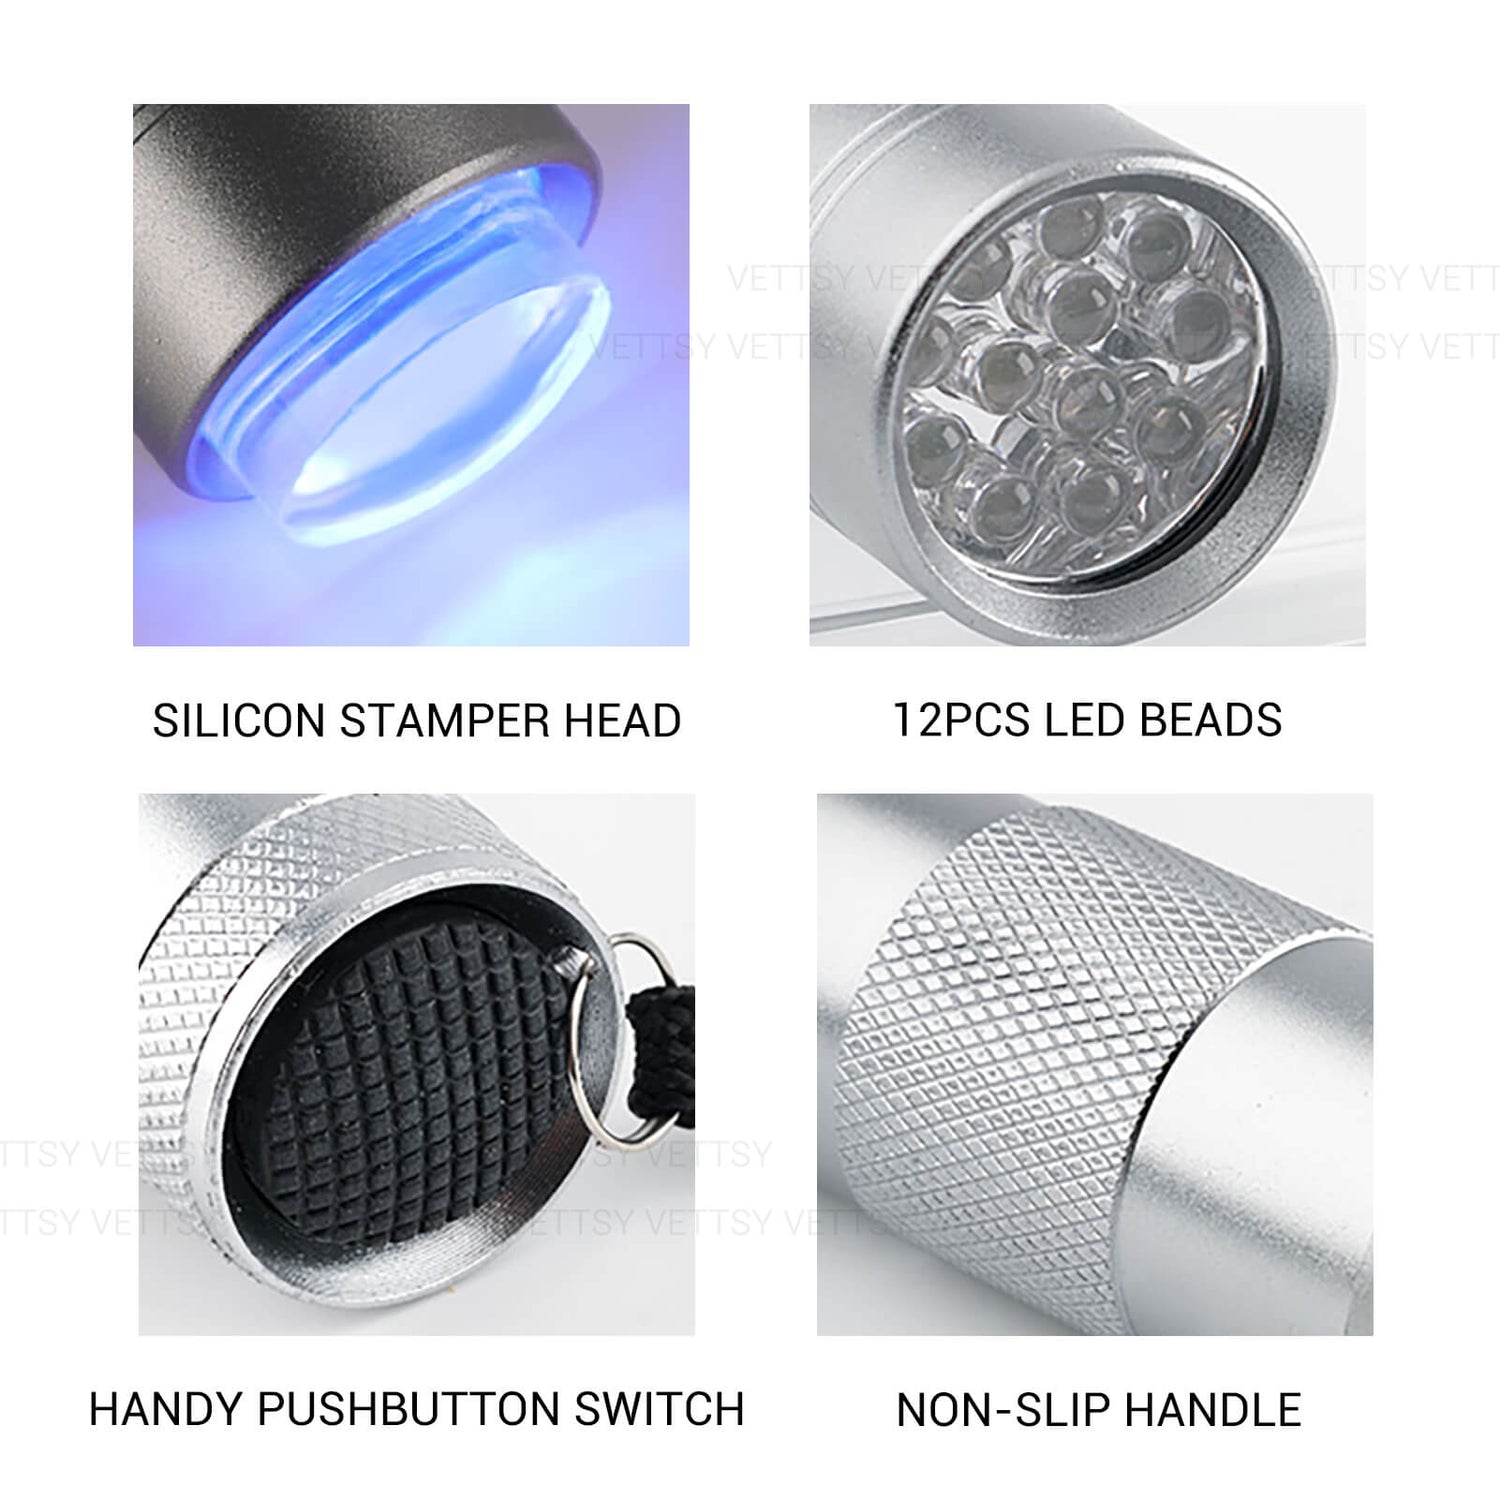 fast-cure-handheld-led-lamp-with-silicon-stamper-head-features